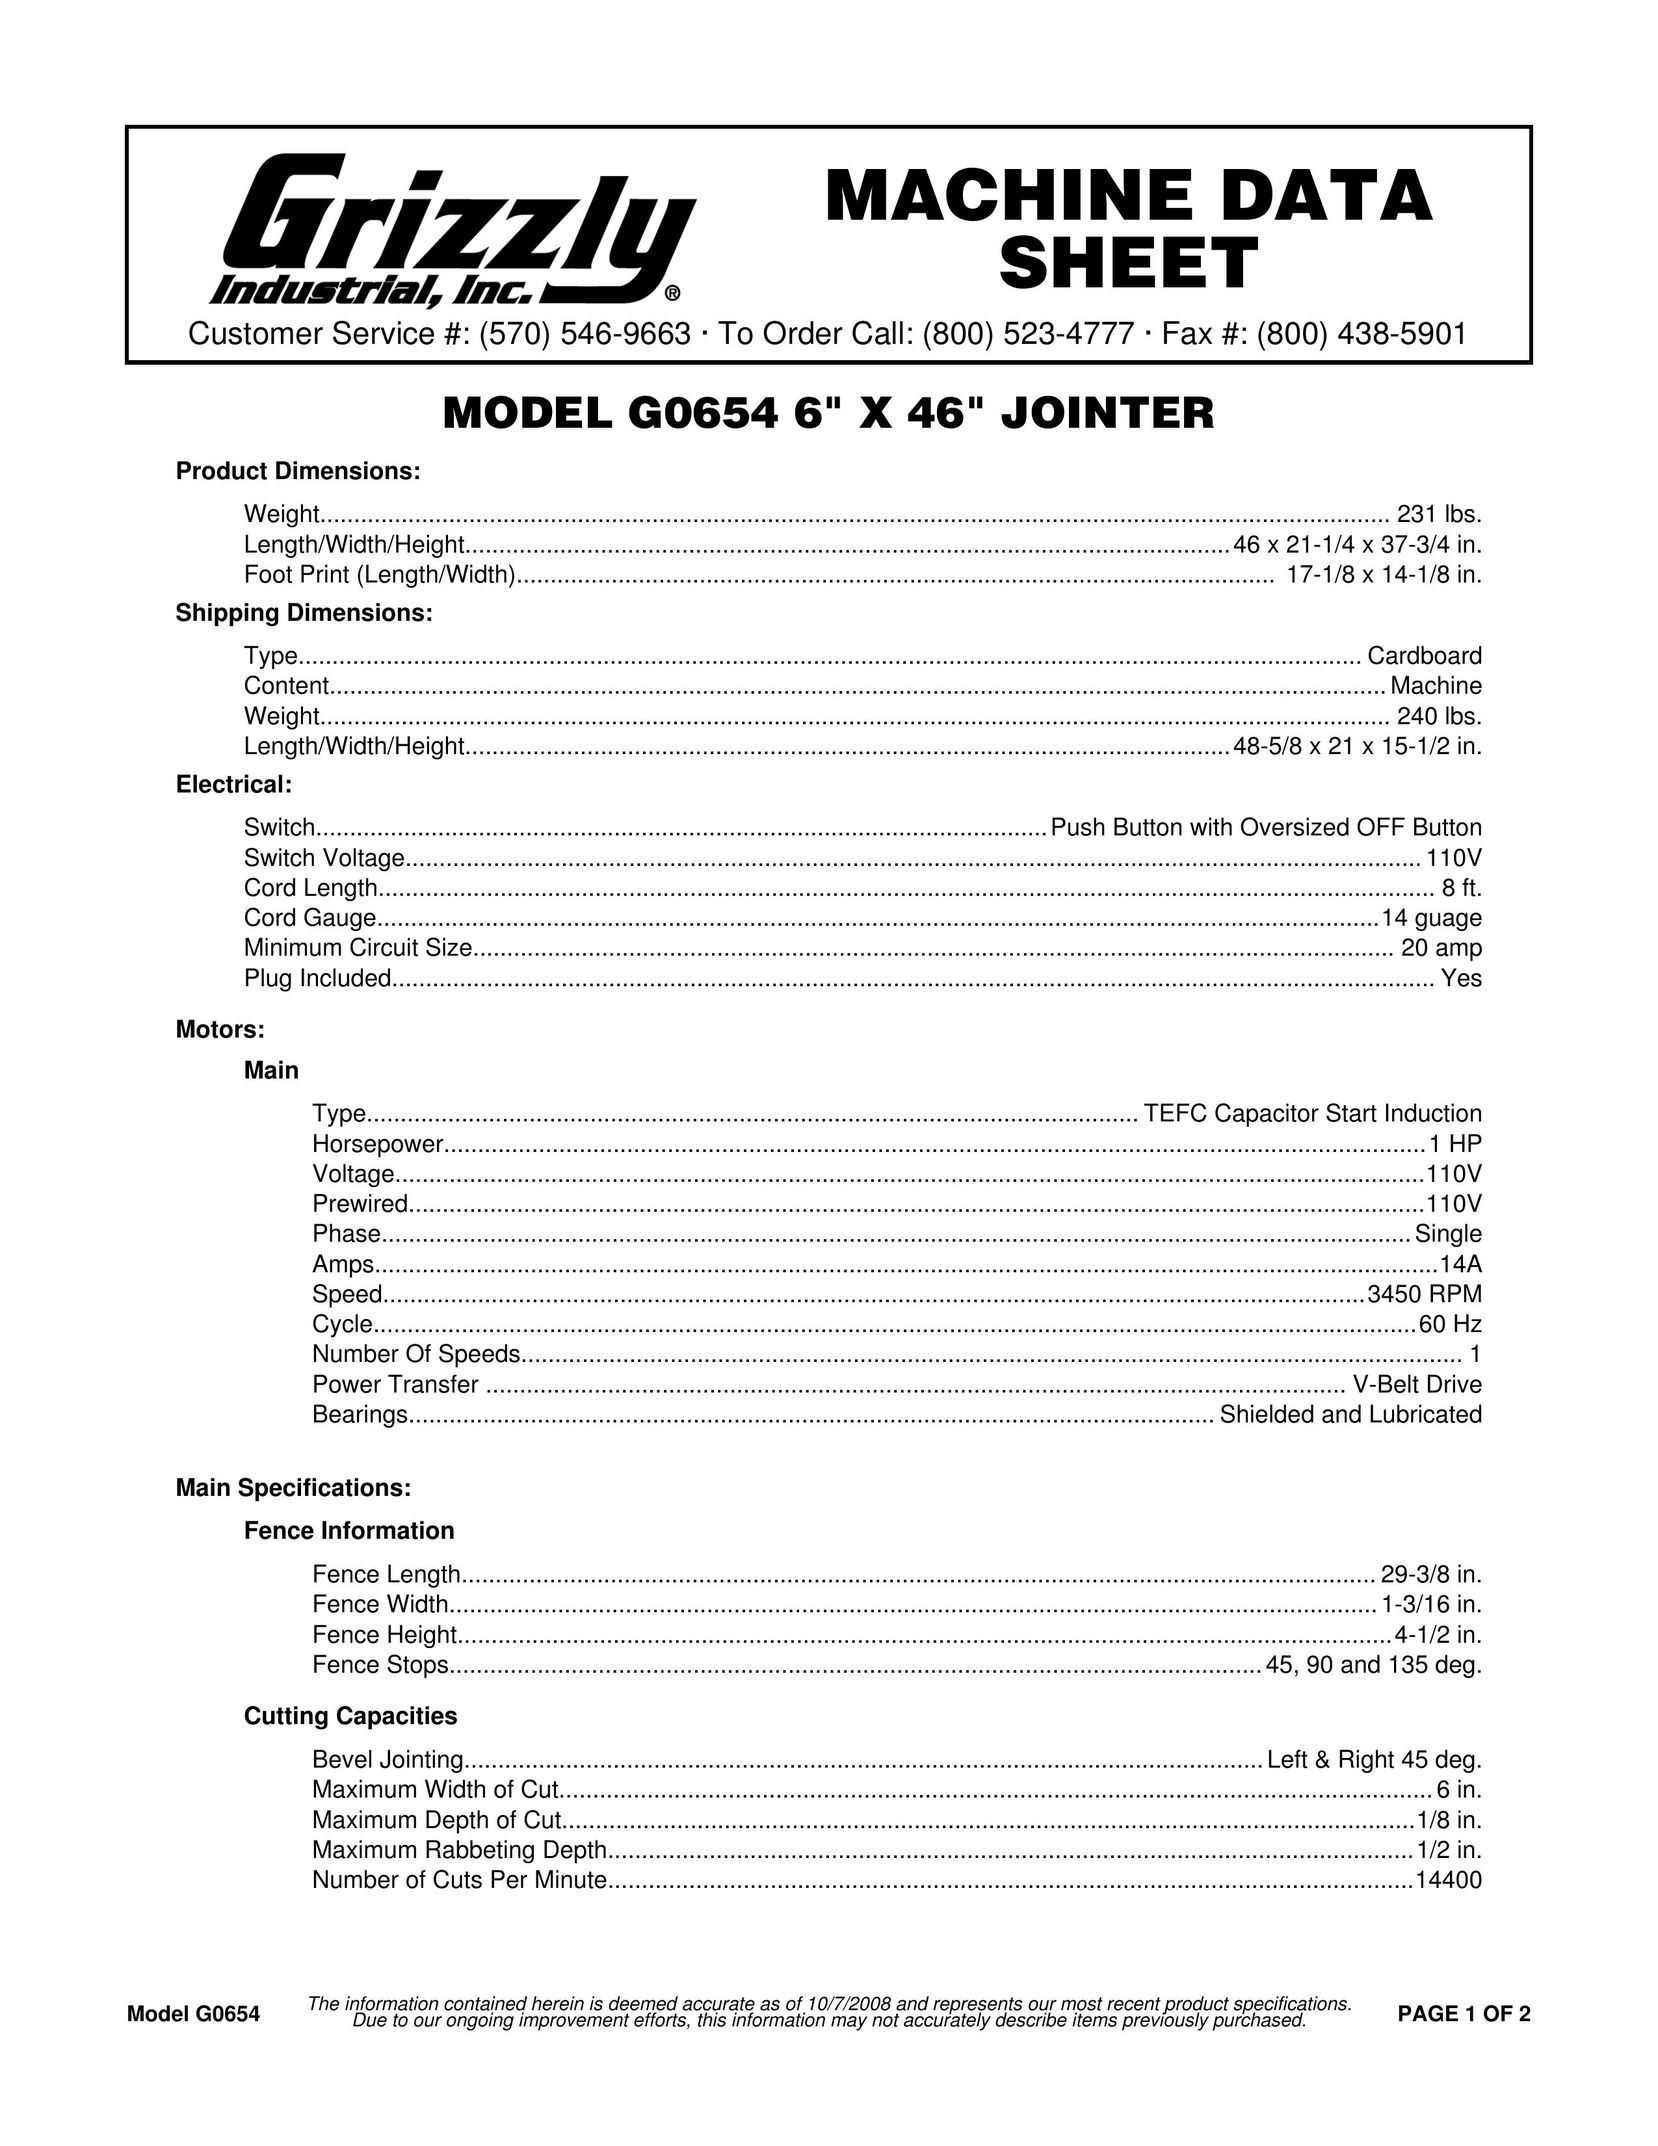 Grizzly G0654 Biscuit Joiner User Manual